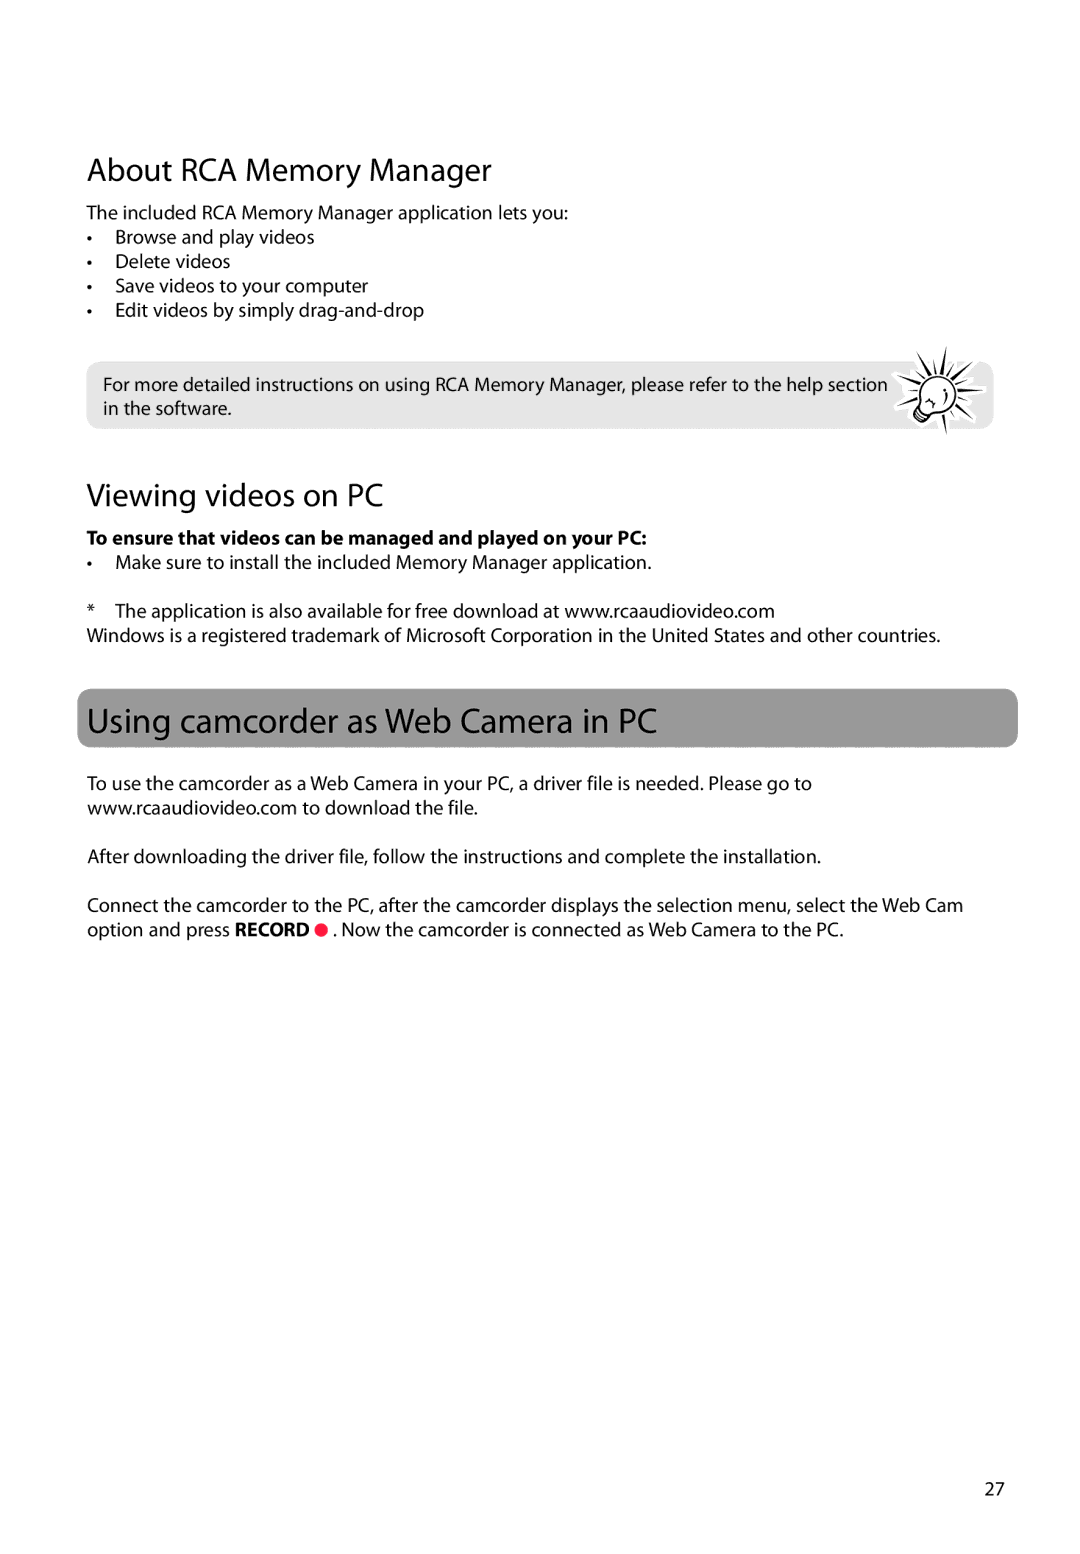 RCA EZ2050 user manual Using camcorder as Web Camera in PC, About RCA Memory Manager, Viewing videos on PC 